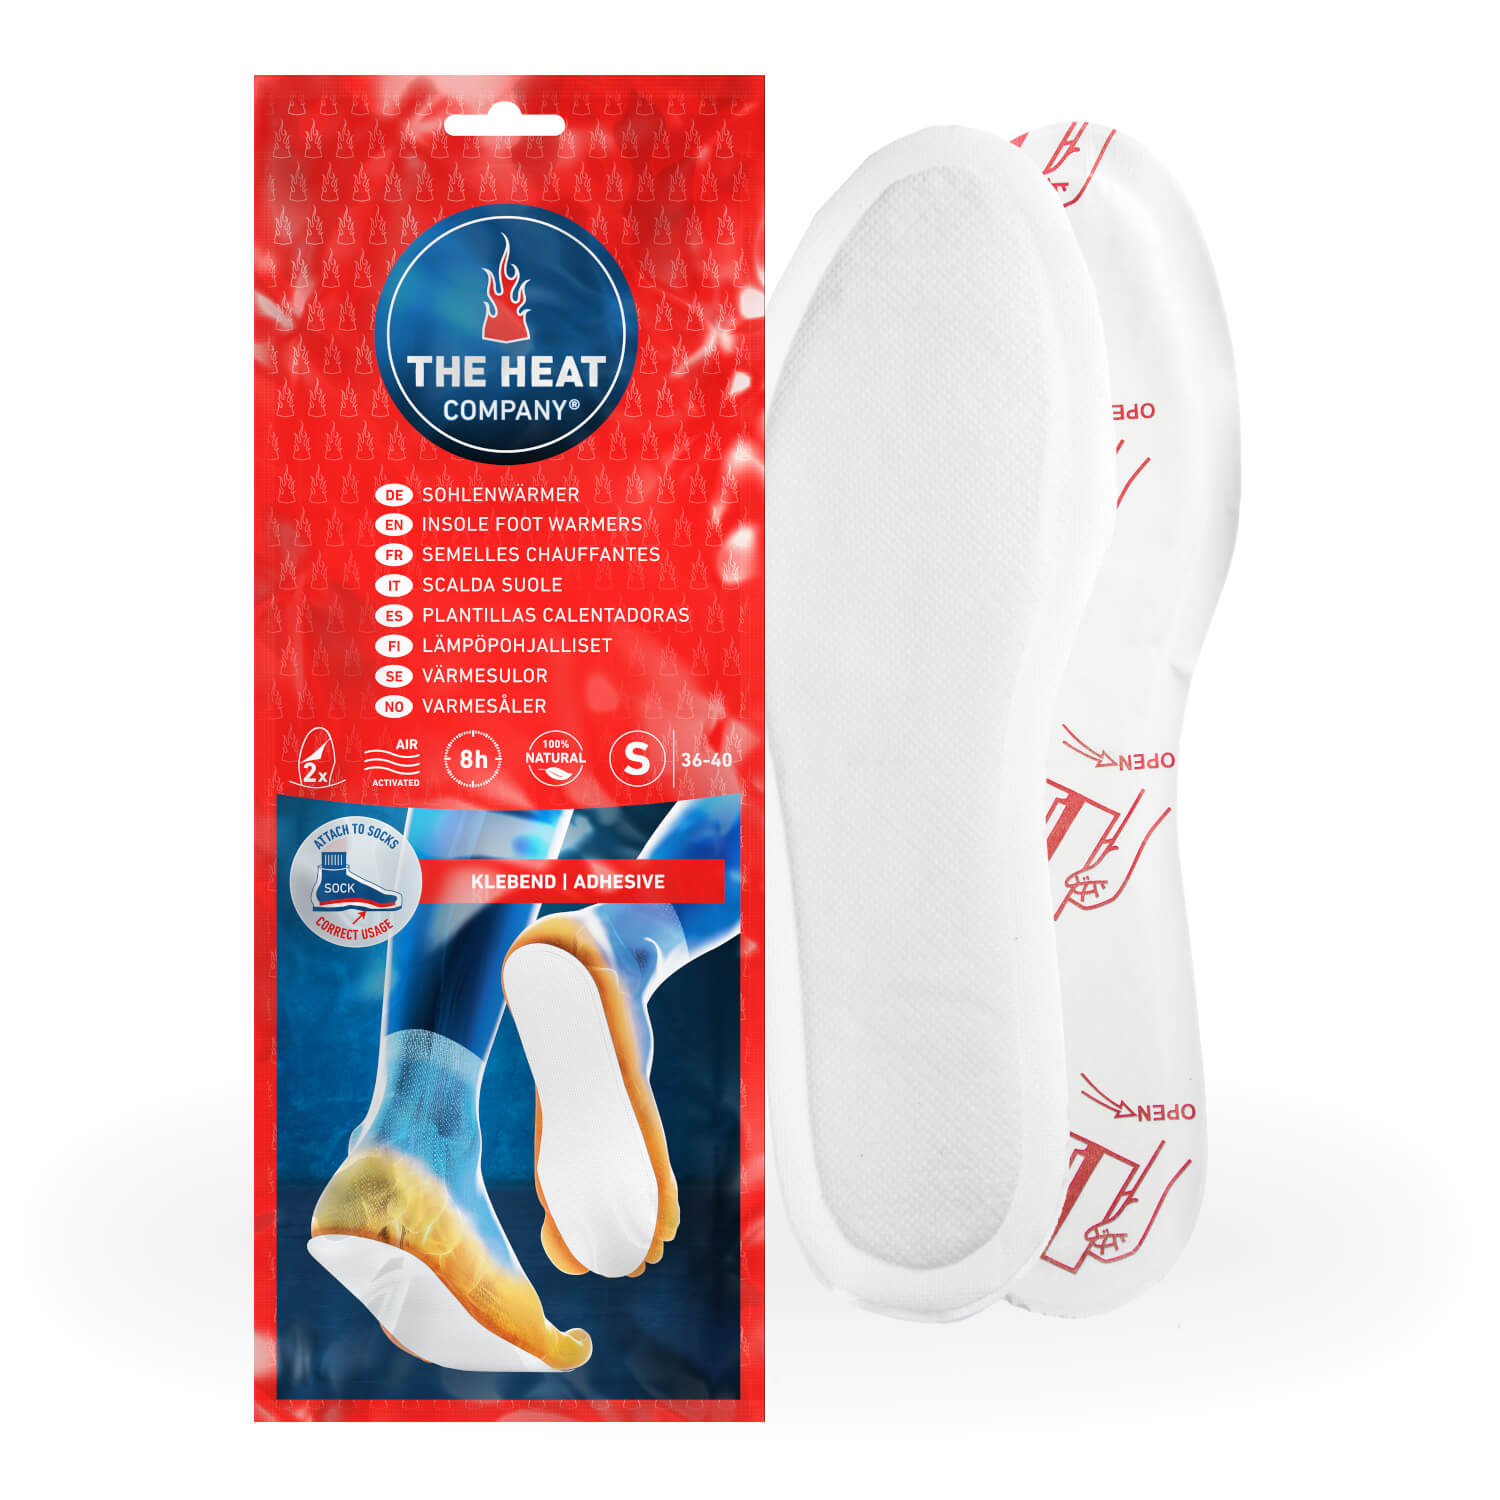 Adhesive Foot Warmers THE HEAT COMPANY Insole Foot Warmers Adhesive Purely Natural Air Activated EXTRA WARM SMALL Size: 3-6.5-5 or 30 Pairs Instant Heat 8 Hours of Warmth 